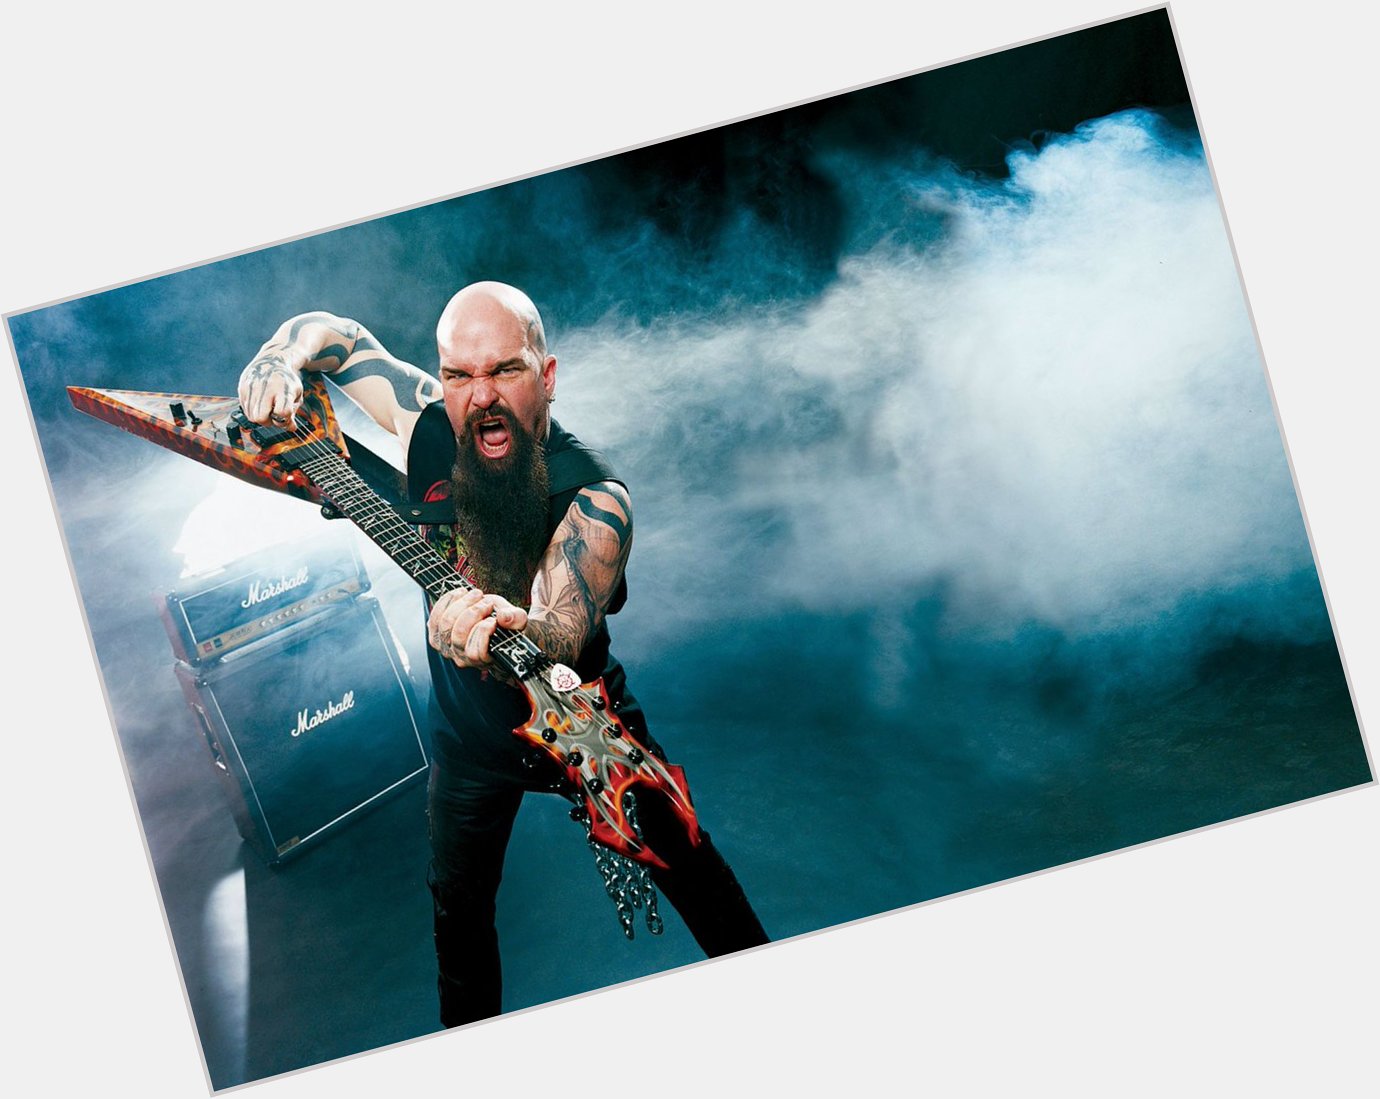 A very HAPPY BIRTHDAY to the one and only Kerry King!  